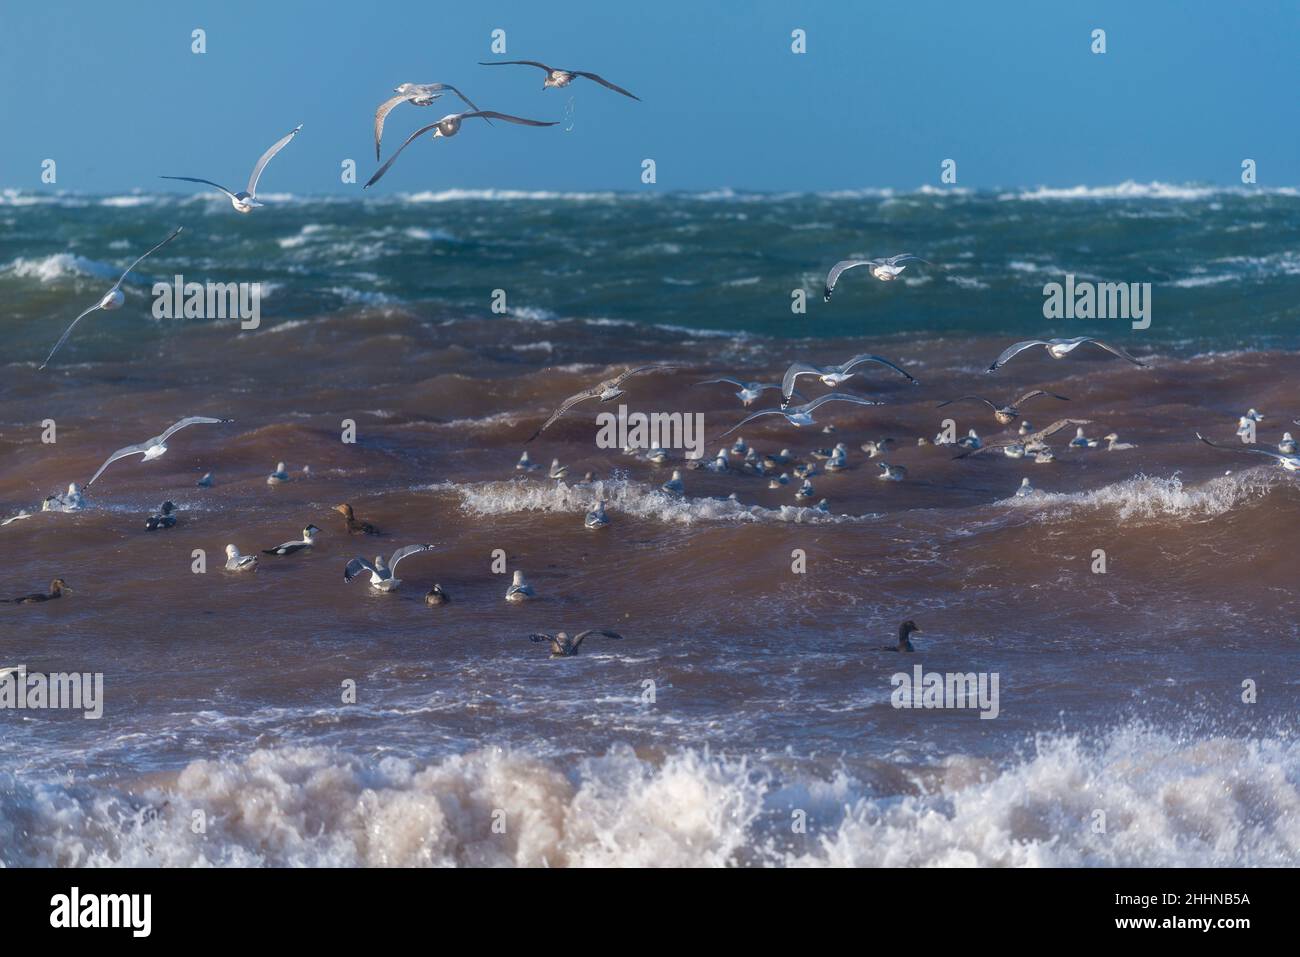 Water birds looking for some quieter place in stormy weather conditions, North Sea island of Heligoland, Northern Germany, Central Europe Stock Photo